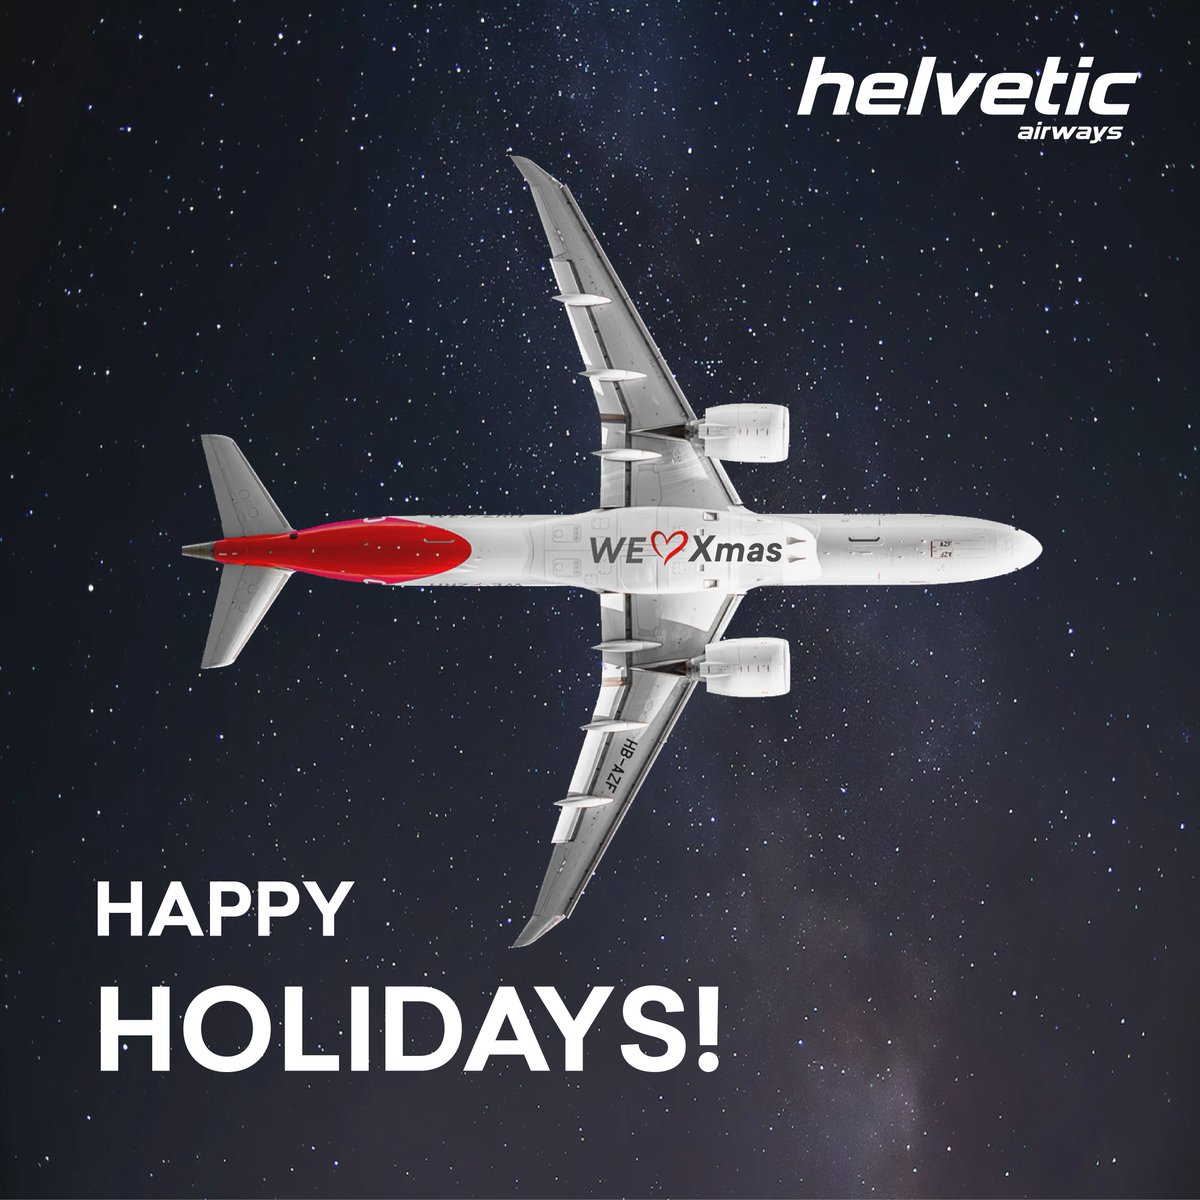 As the year comes to an end, we are filled with gratitude for the incredible journey we've shared with you throughout this year. Helvetic Airways wishes: Merry Christmas, and a fantastic take off into the New Year! 🎄